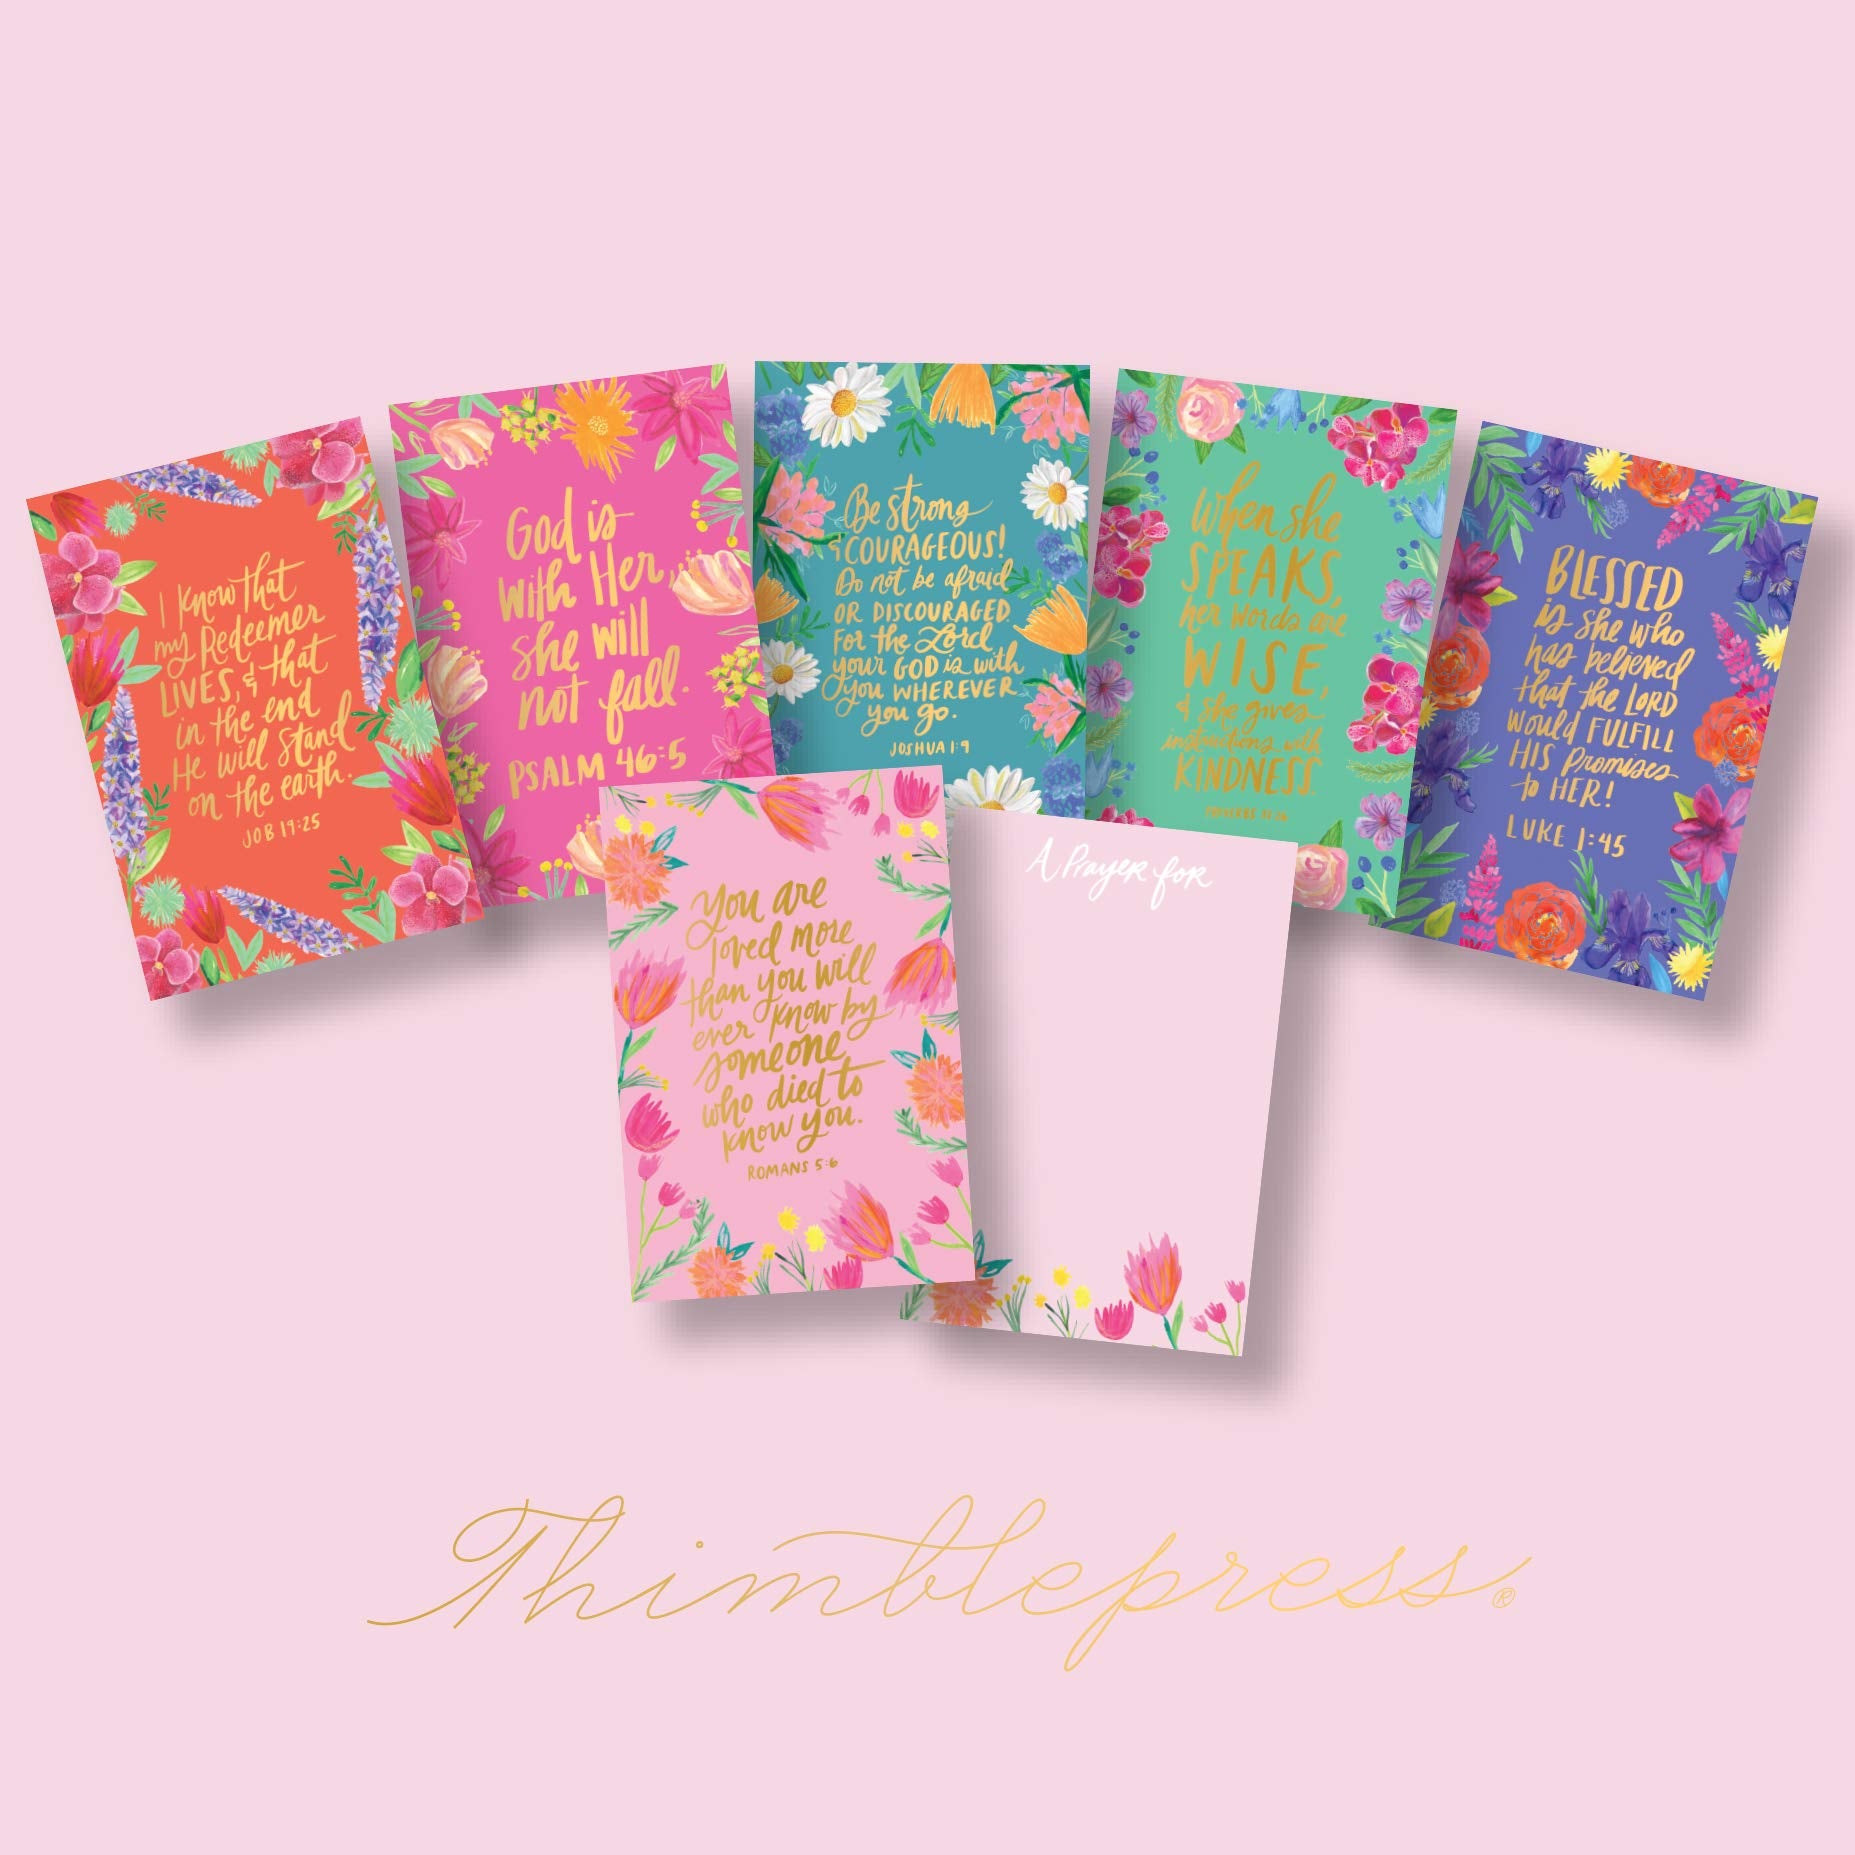 36 Double Sided Prayer Cards by Thimblepress